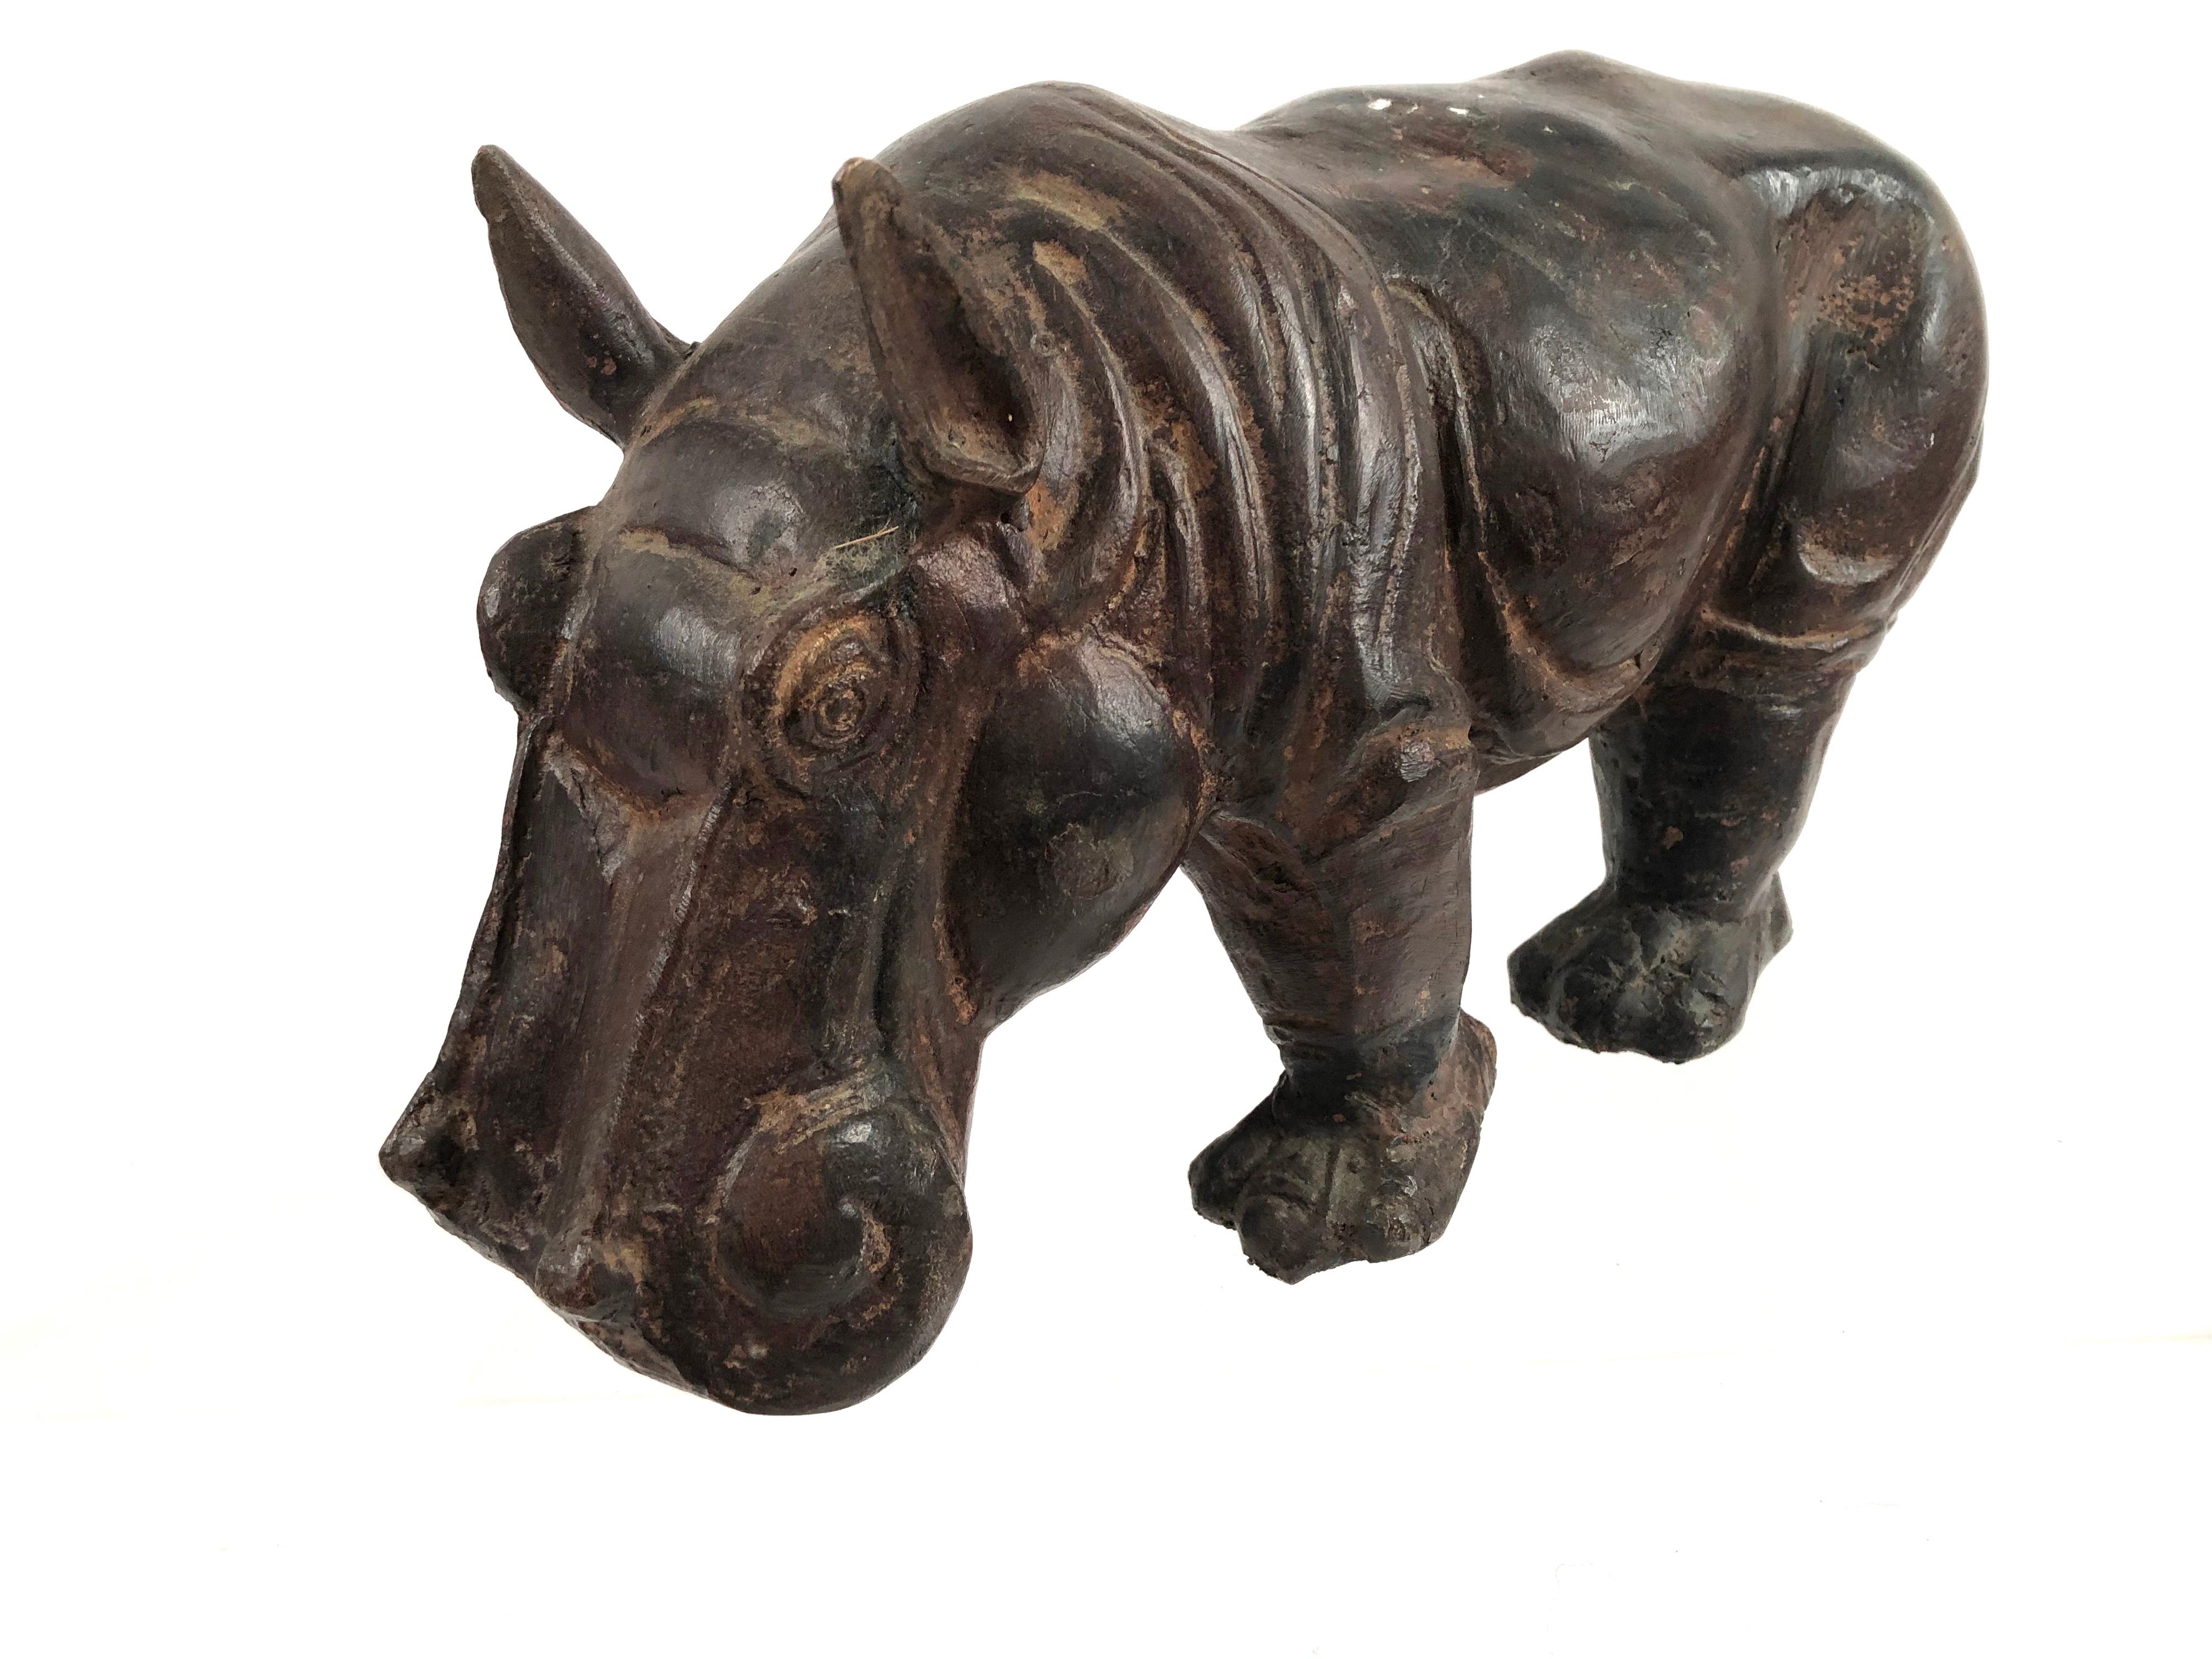 An unusual and robustly modelled art pottery figure of a hippopotamus in brown glazed stoneware, circa 1960s-1970s.